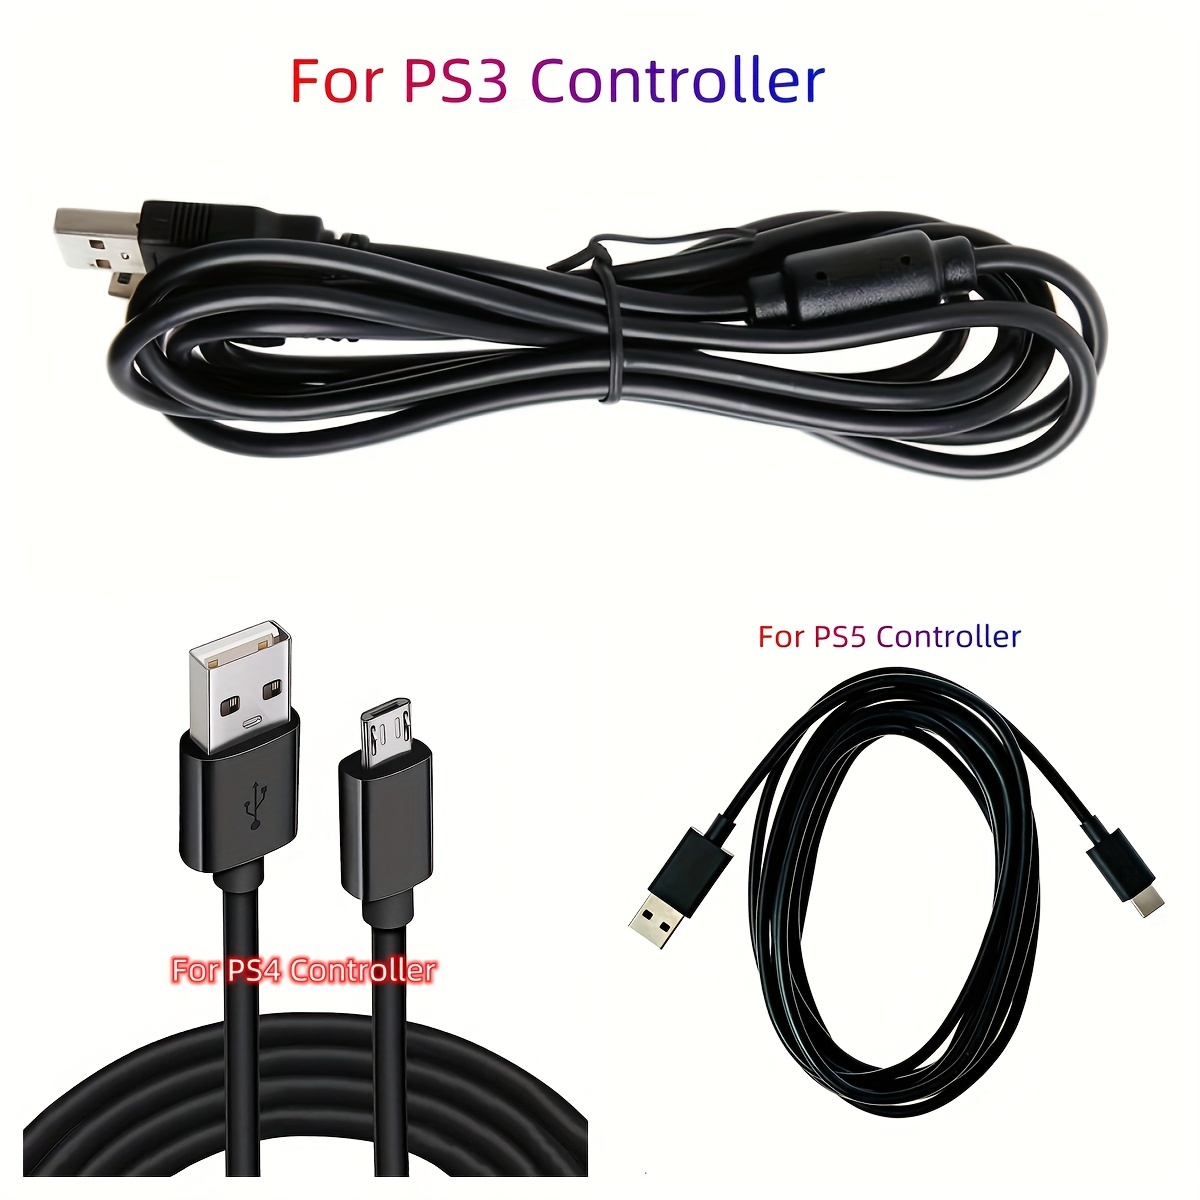 USB 3.0 VR Adapter Cable Camera Connecter Replacement For PS5 PS4